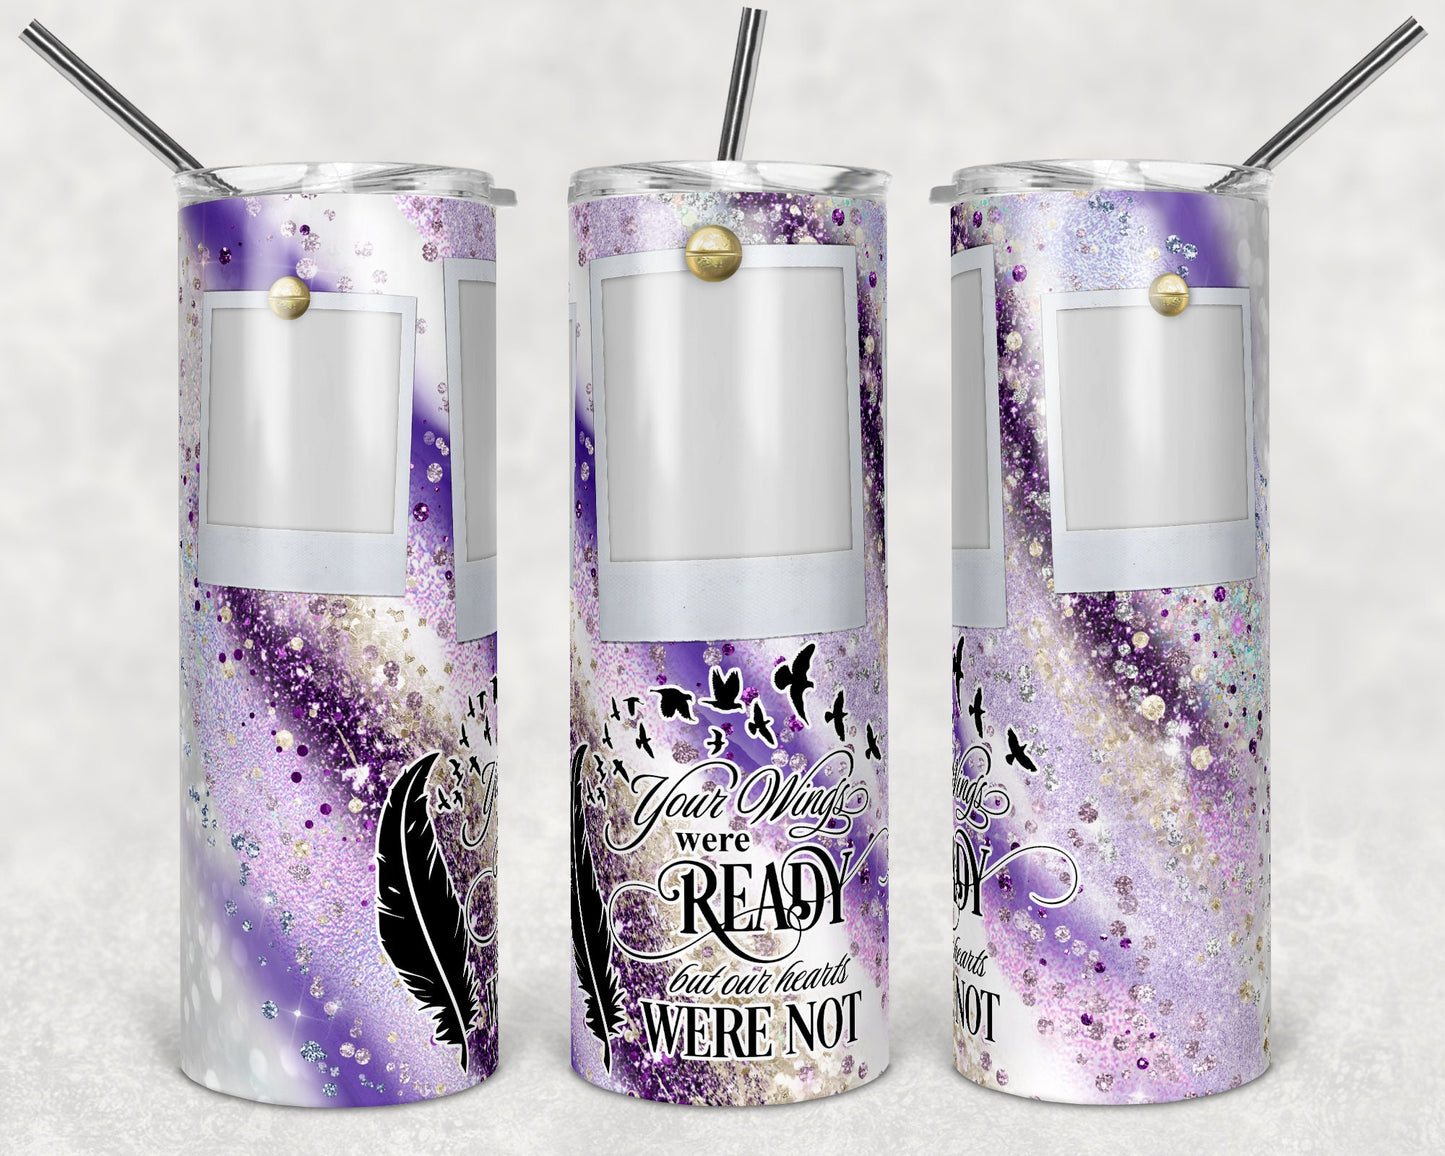 20 oz Skinny Tumbler Memorial Purple Milky way with photo Frames Wings Were Ready Sublimation Design